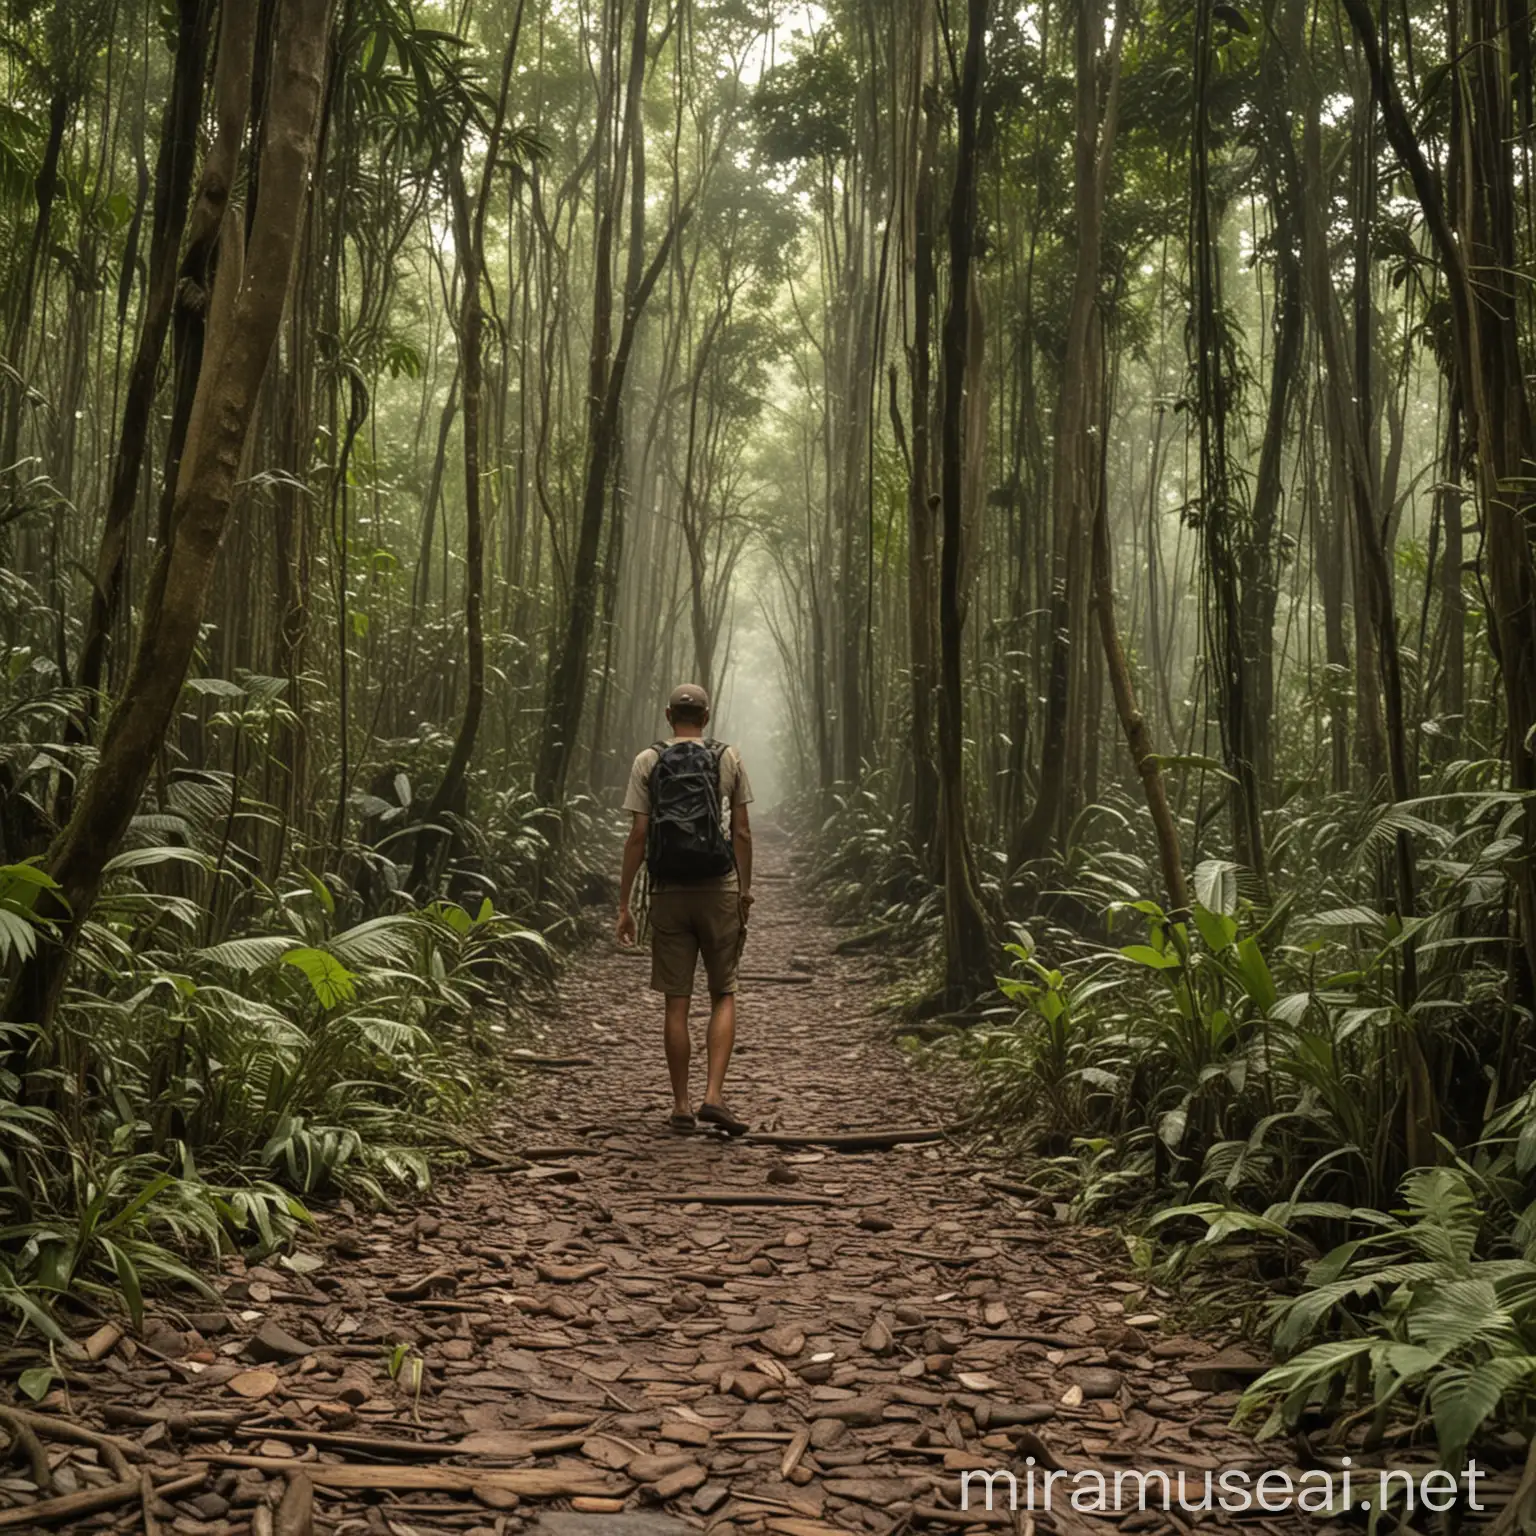 VENTURING INTO THE HEART OF THE AMAZON RAINFOREST: A JOURNEY TO THE LUNGS OF THE EARTH